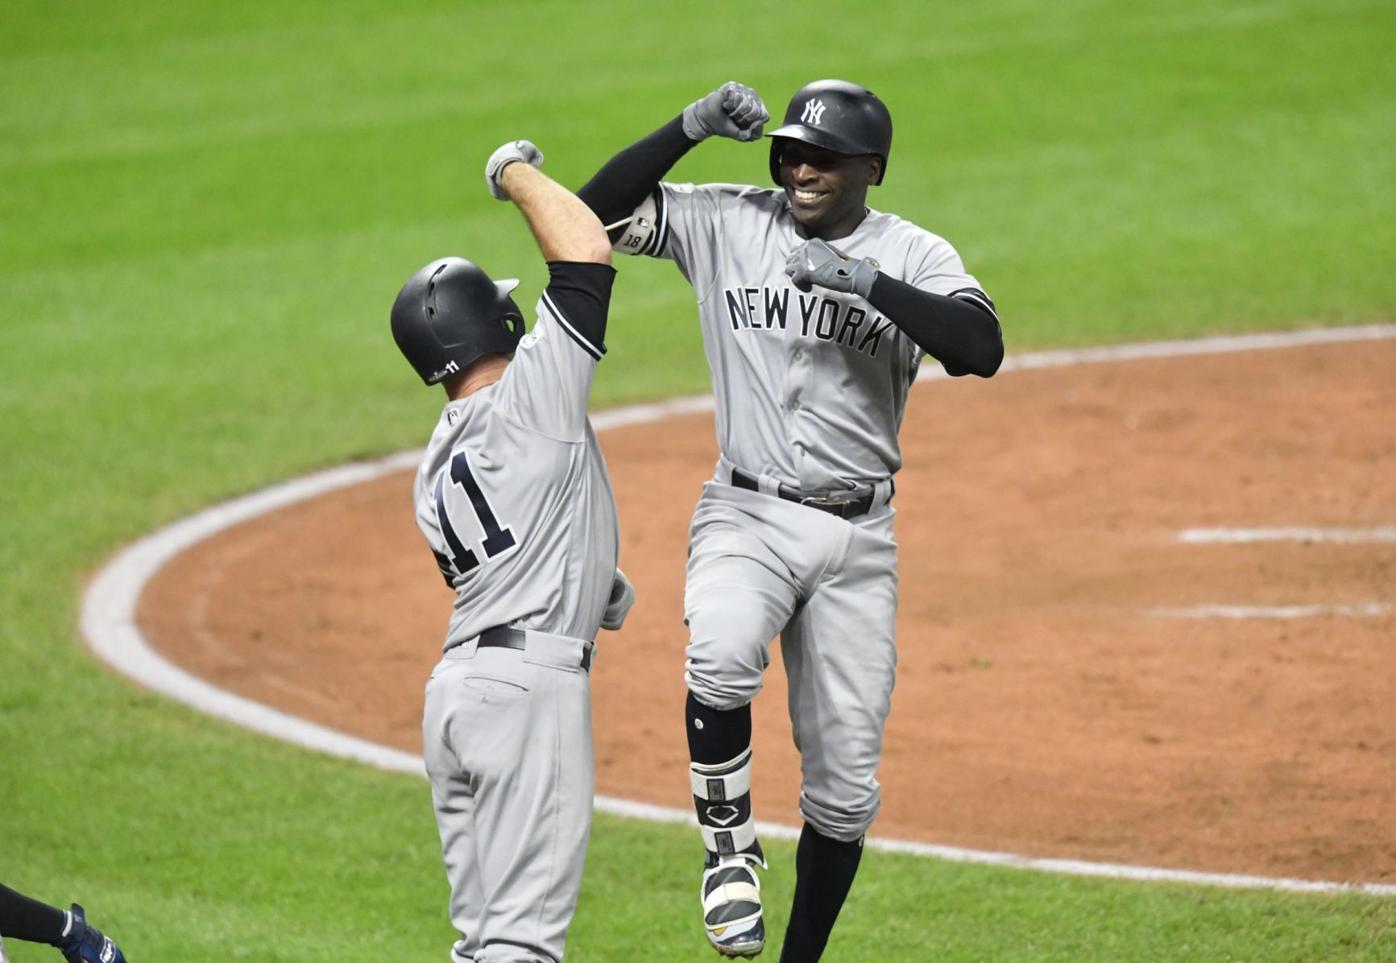 New York Yankees Didi Gregorius hits his first home run of the